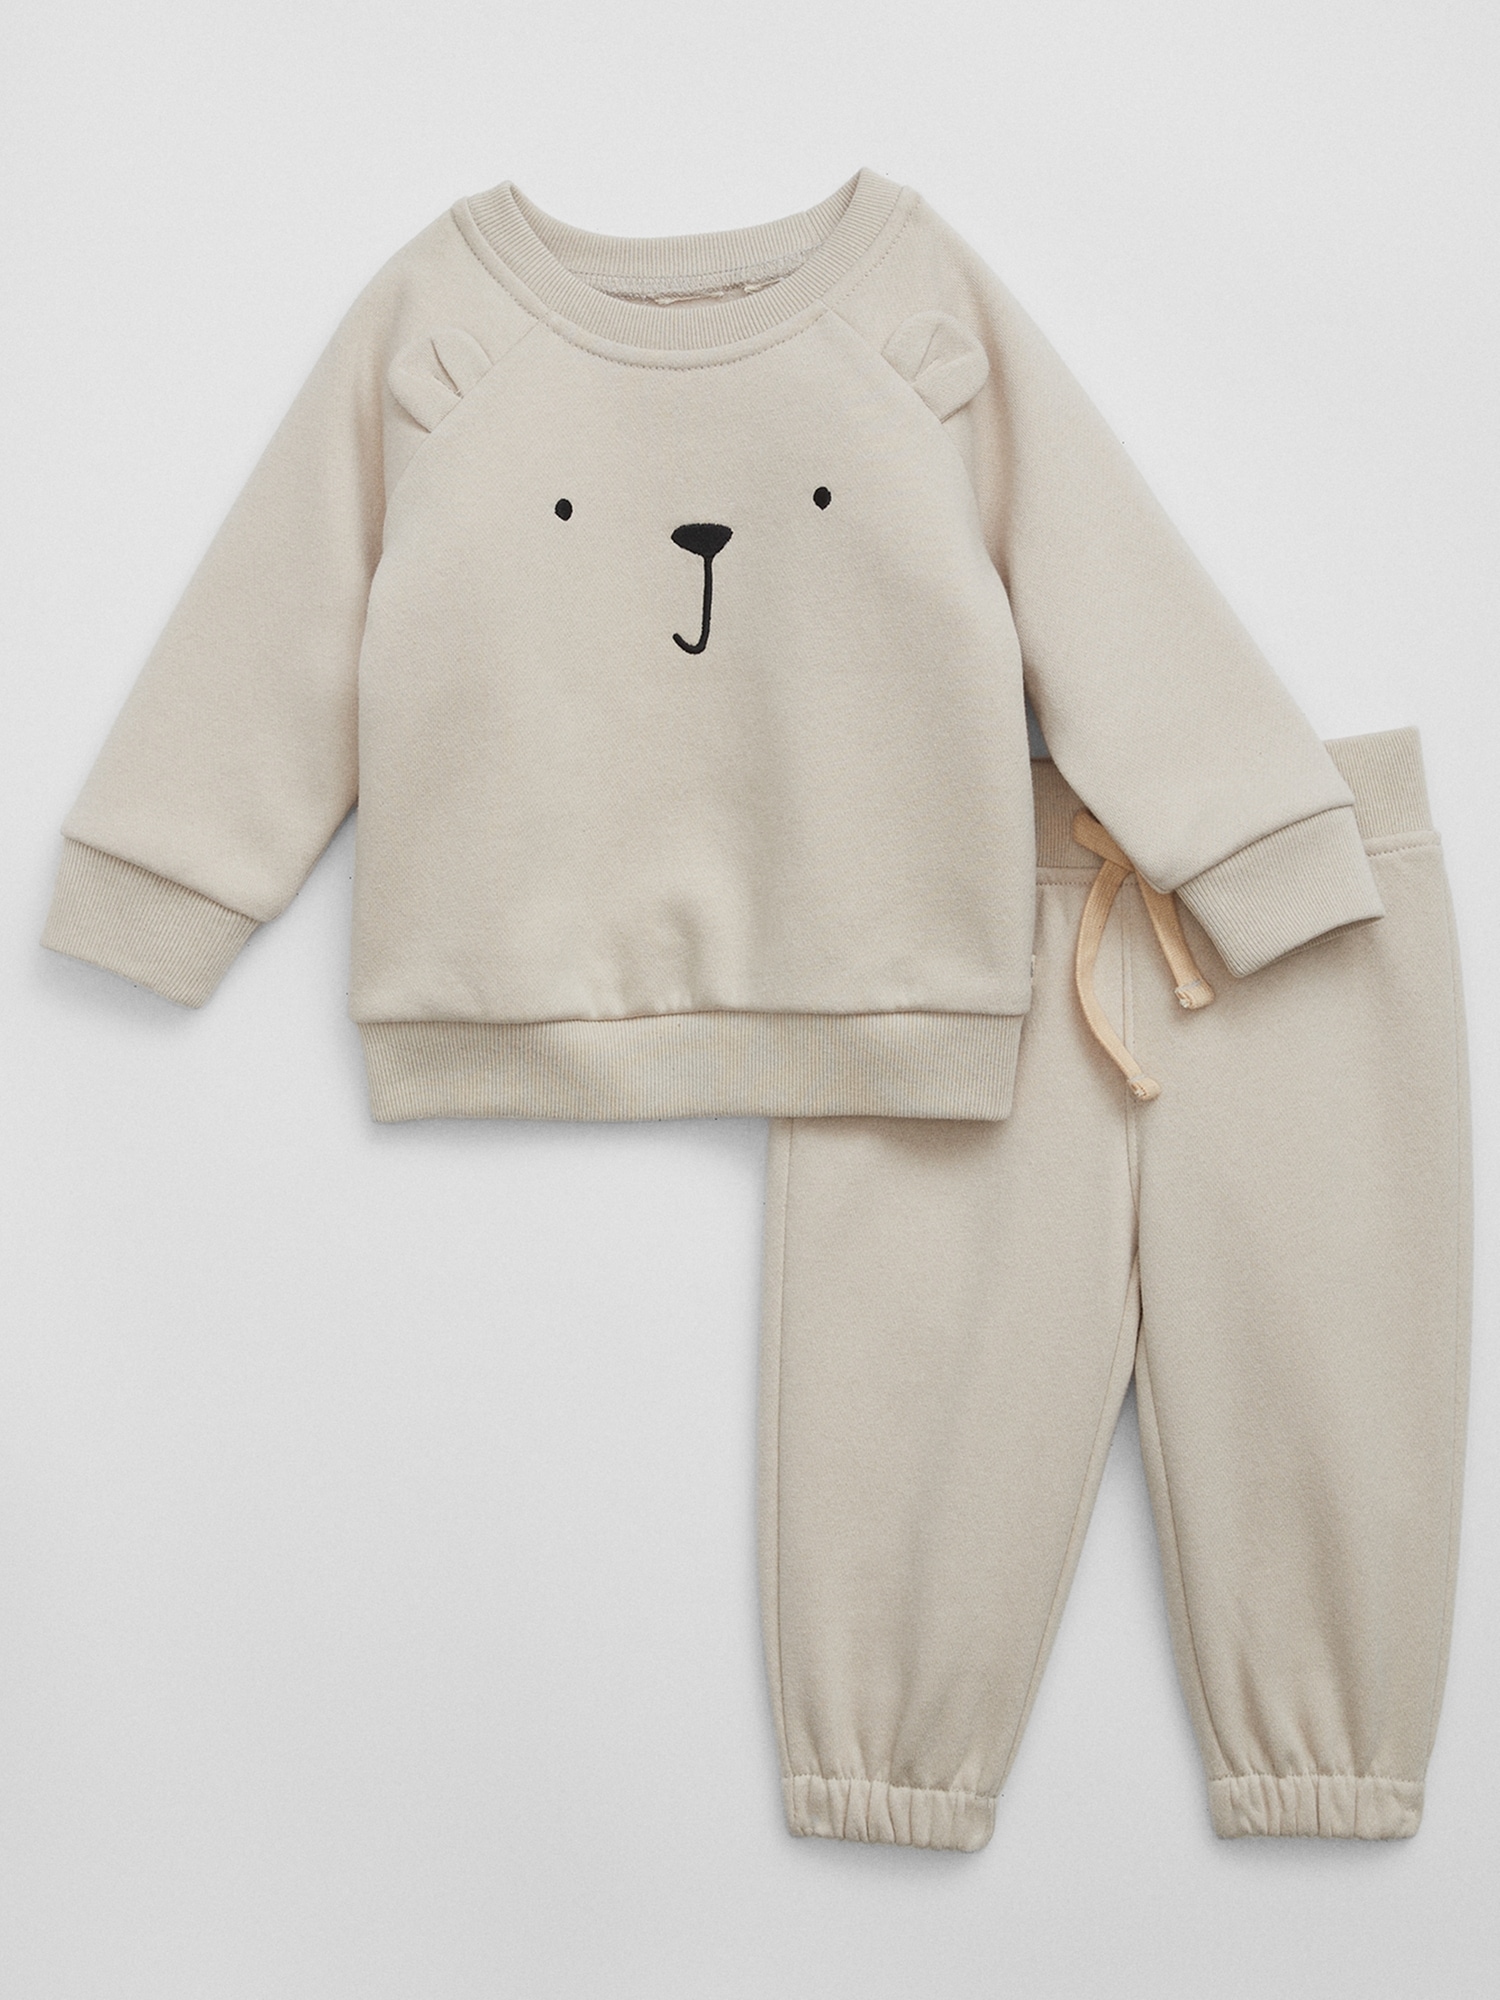 Baby Brannan Bear Two-Piece Outfit Set